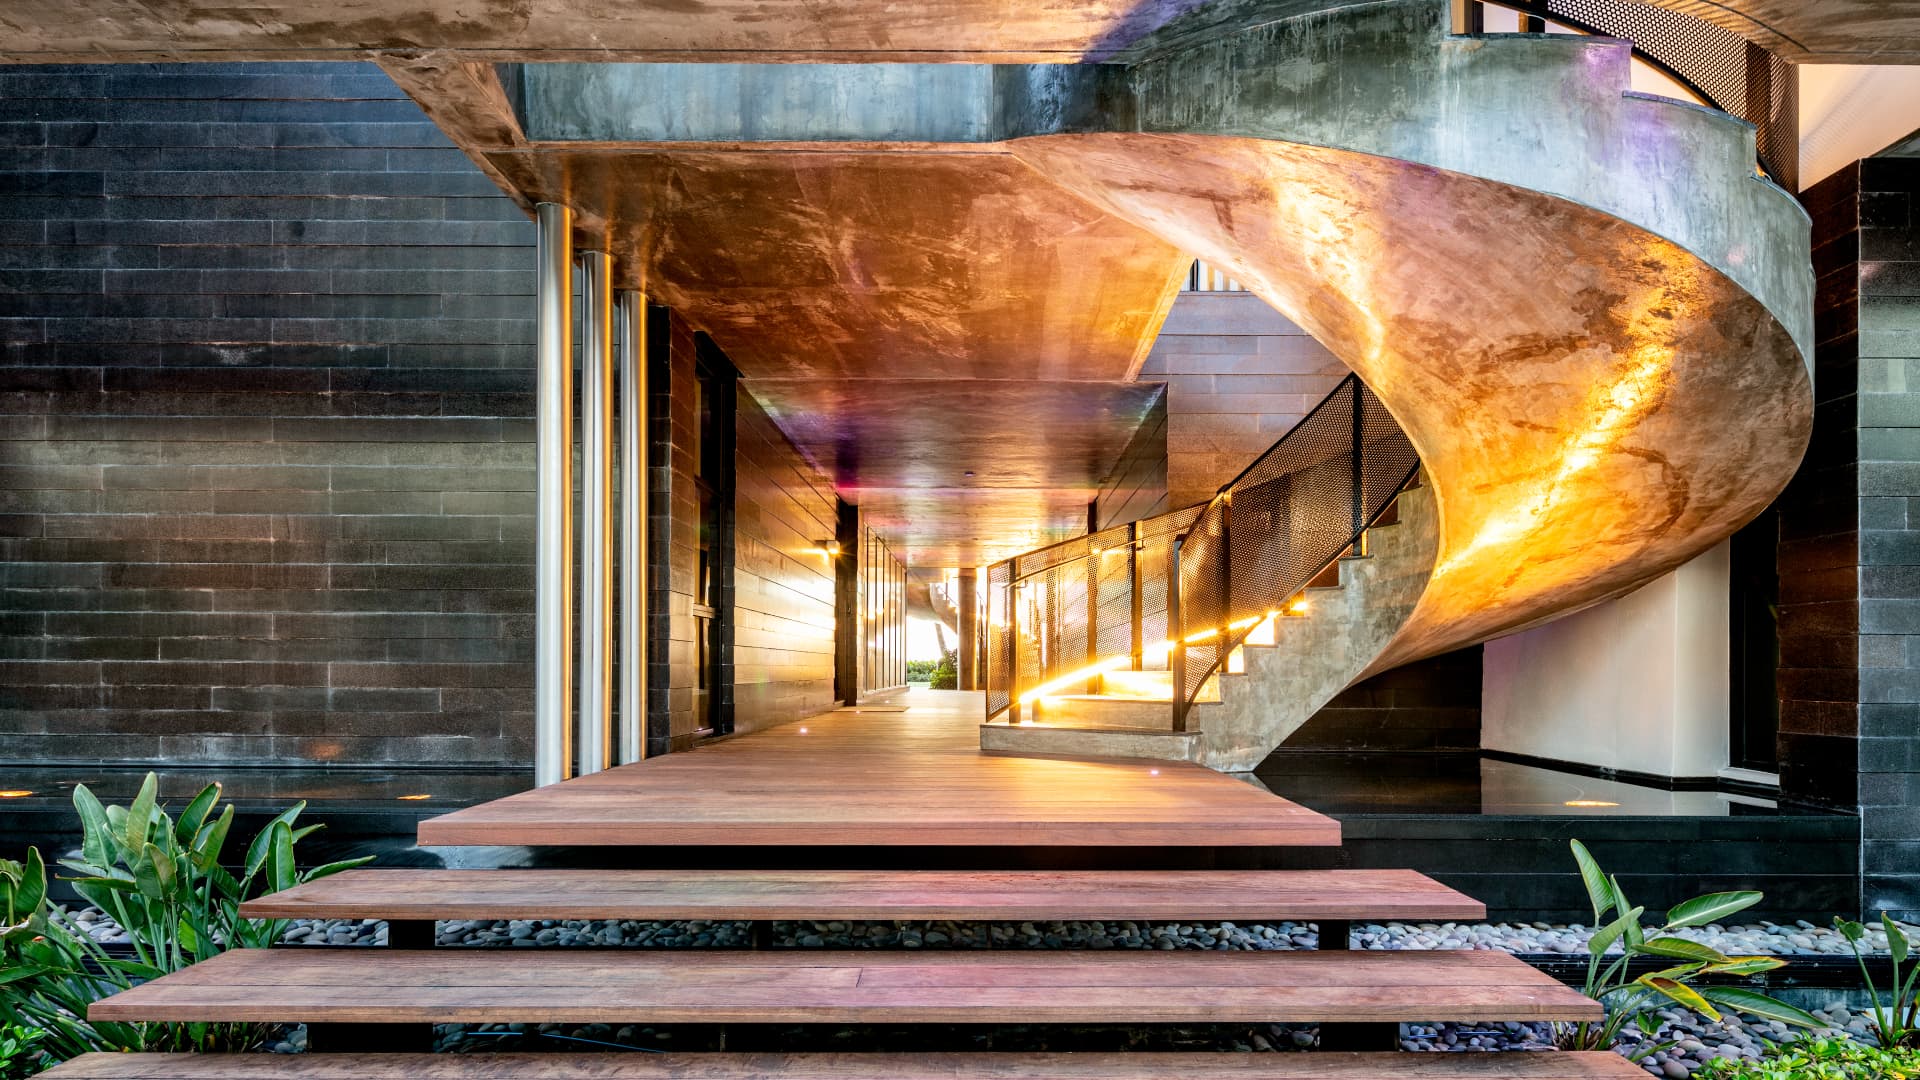 One of the home's two spriral staircases built of polished concrete leading to the homes second level 17 ft above sea level.